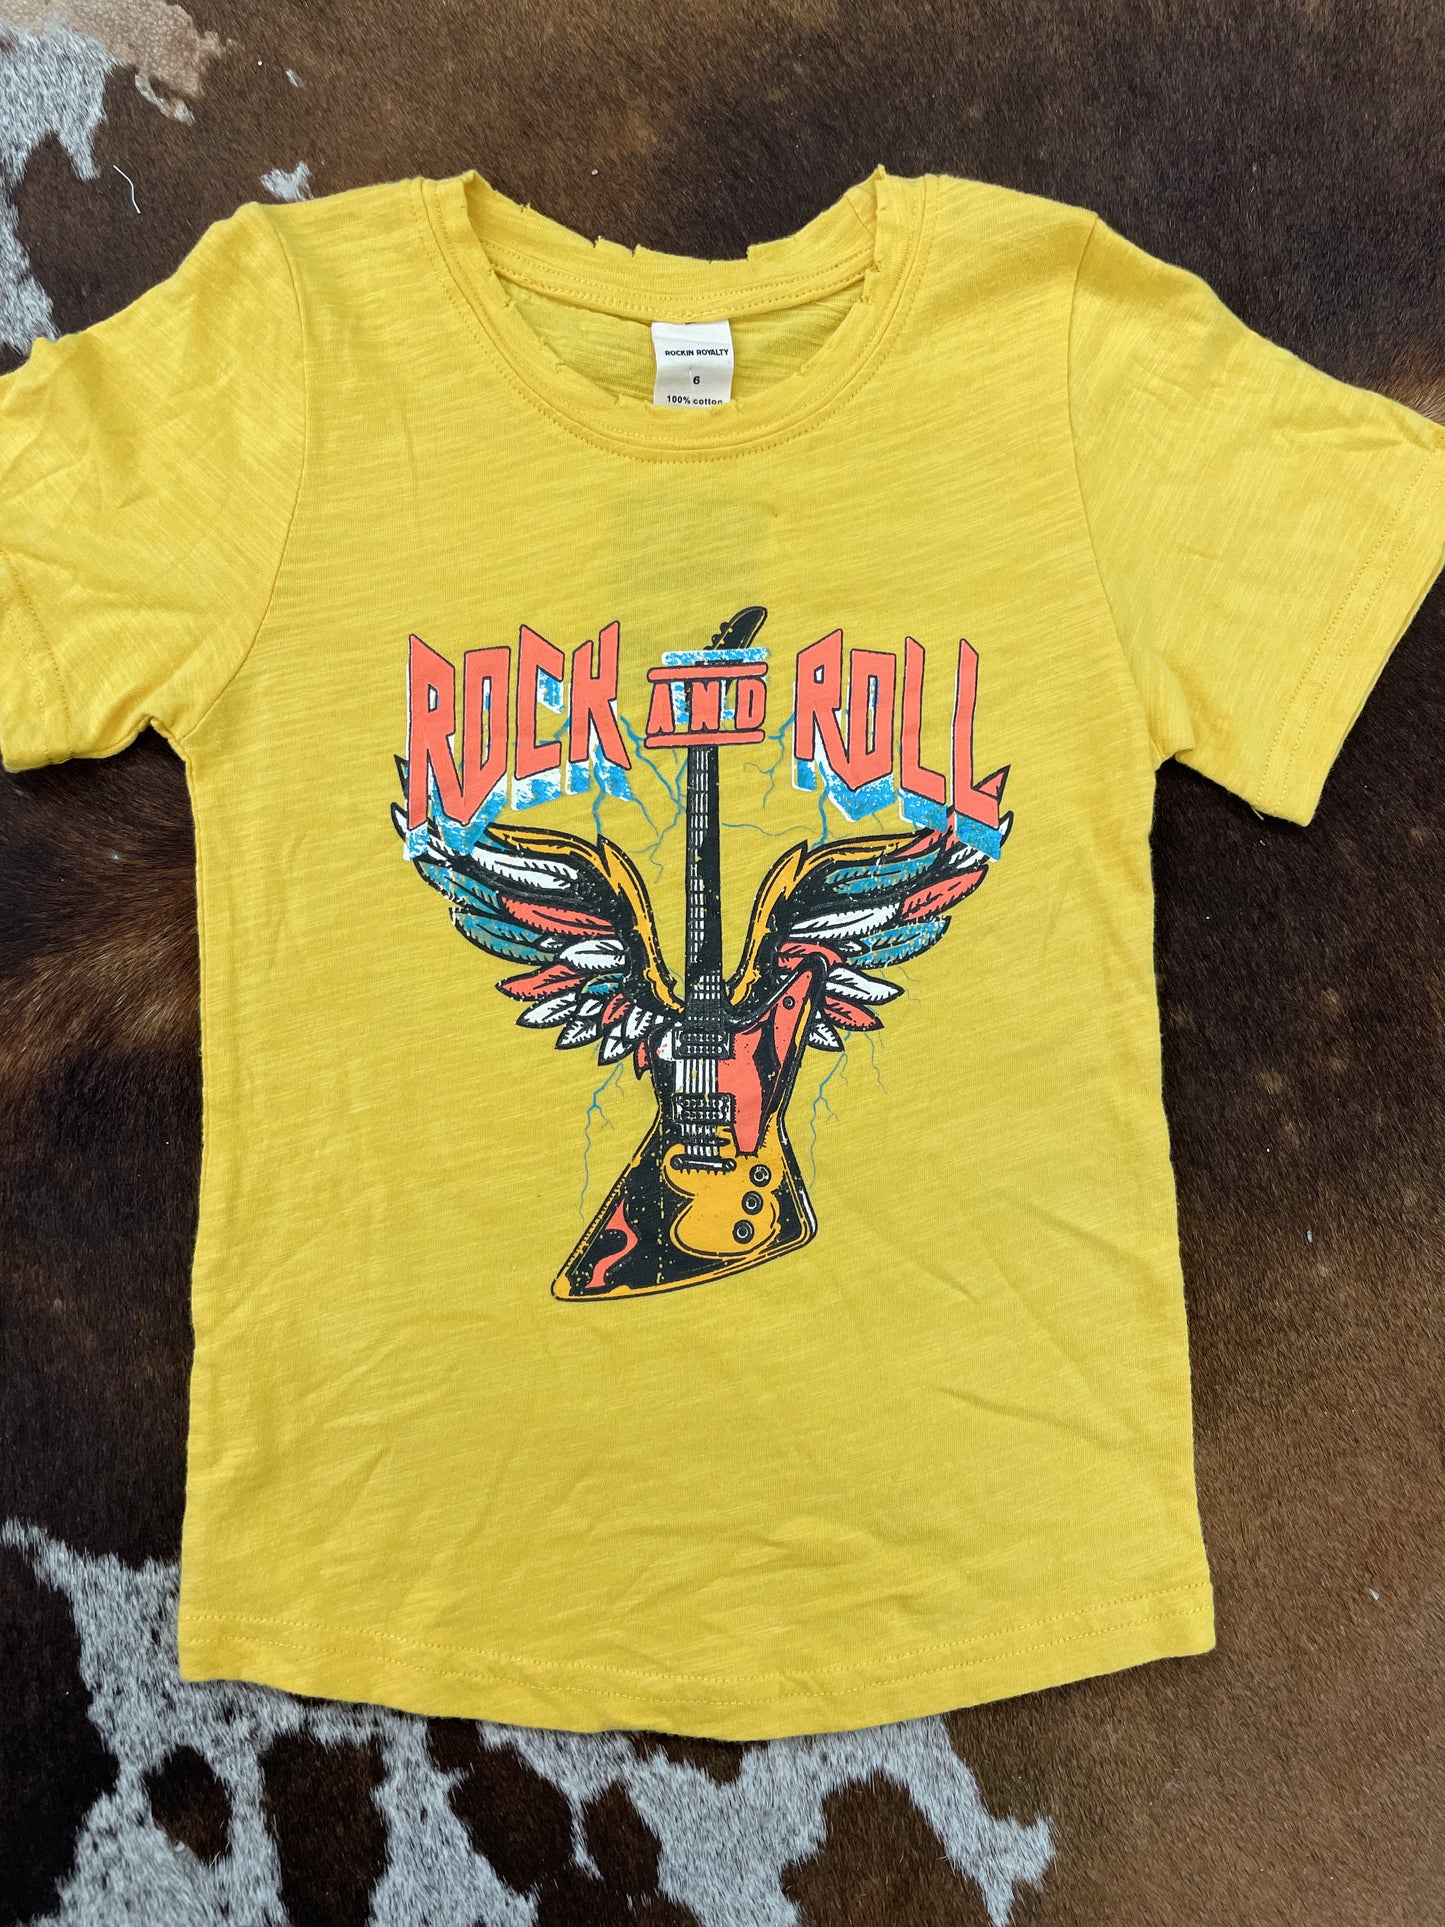 The Rock And Roll Graphic Tee